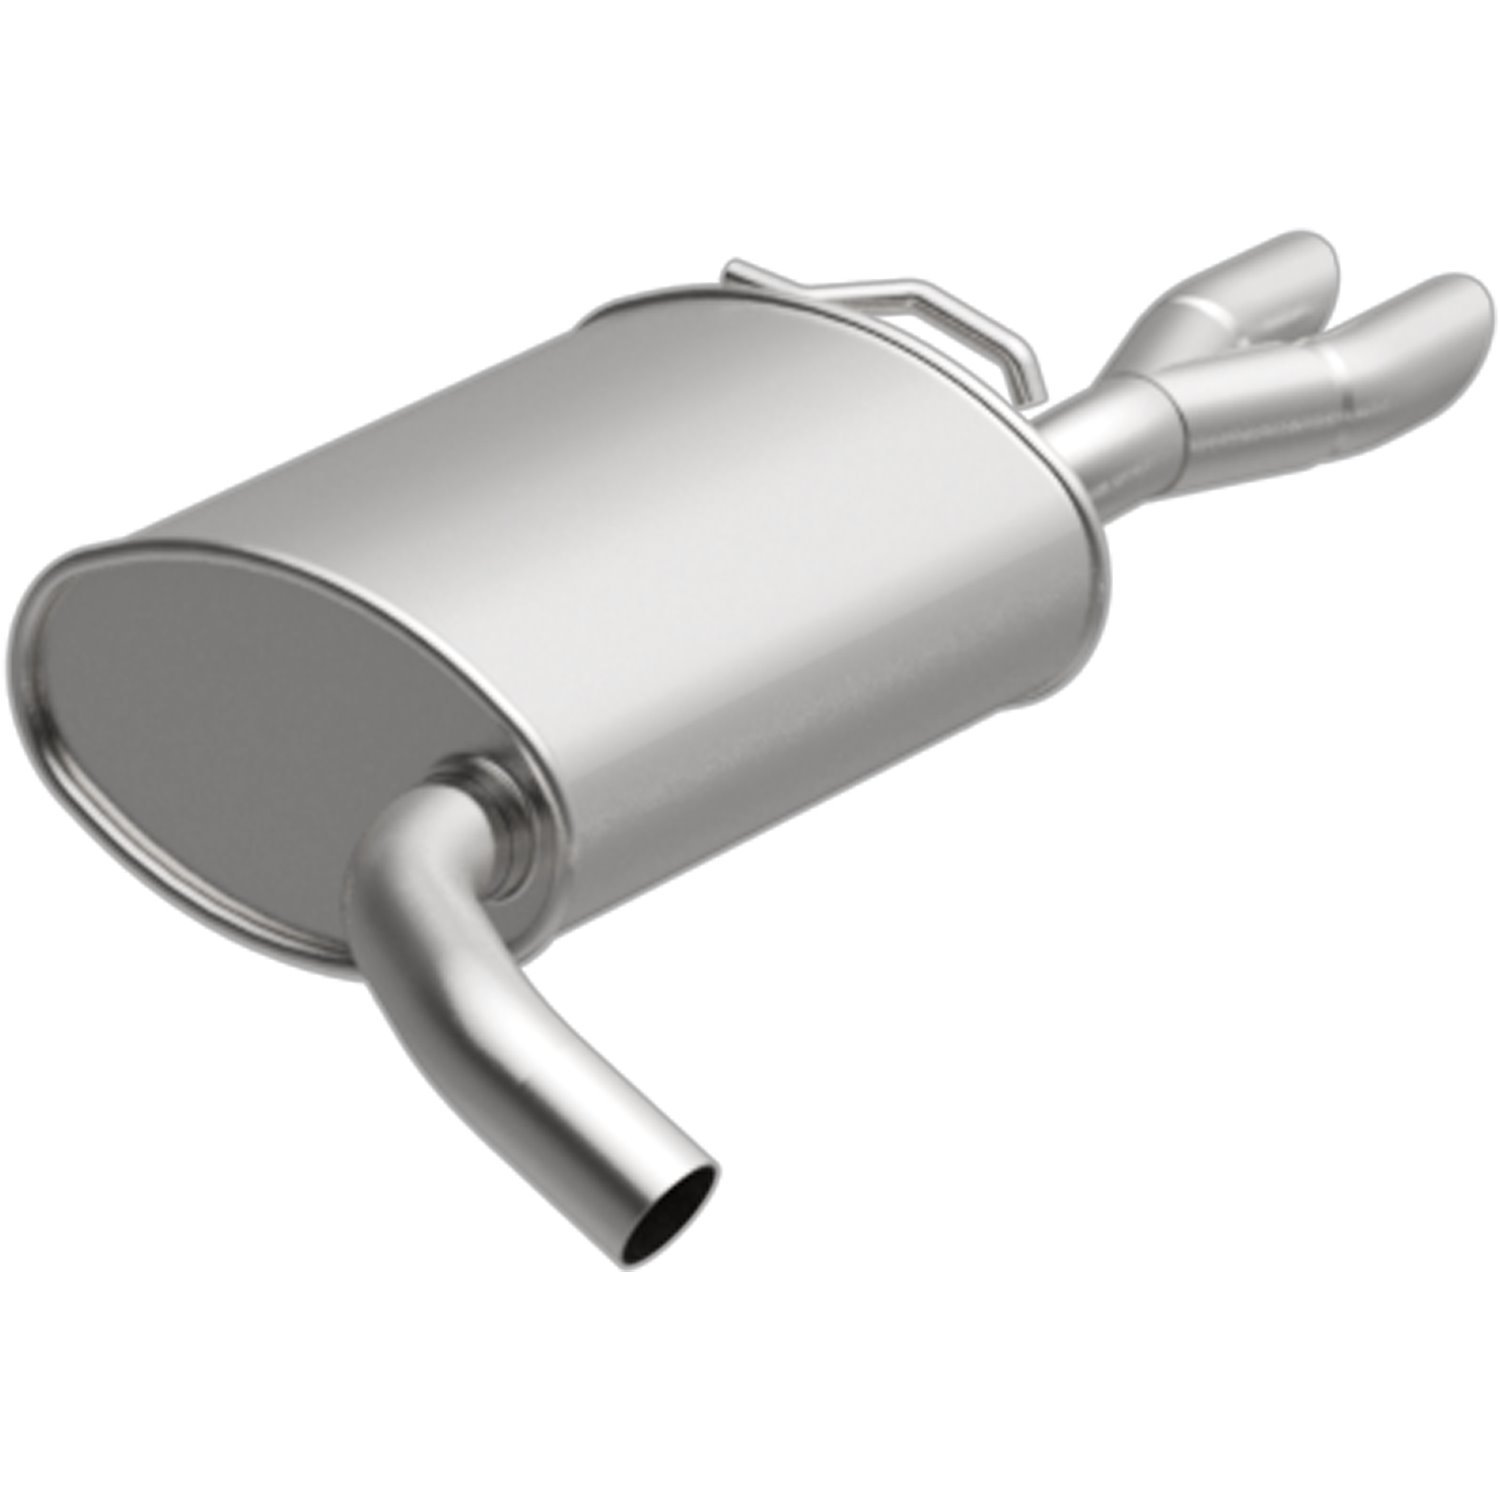 Direct-Fit Exhaust Muffler, 2006-2012 Ford Fusion, Mercury Milan, Lincoln MKZ